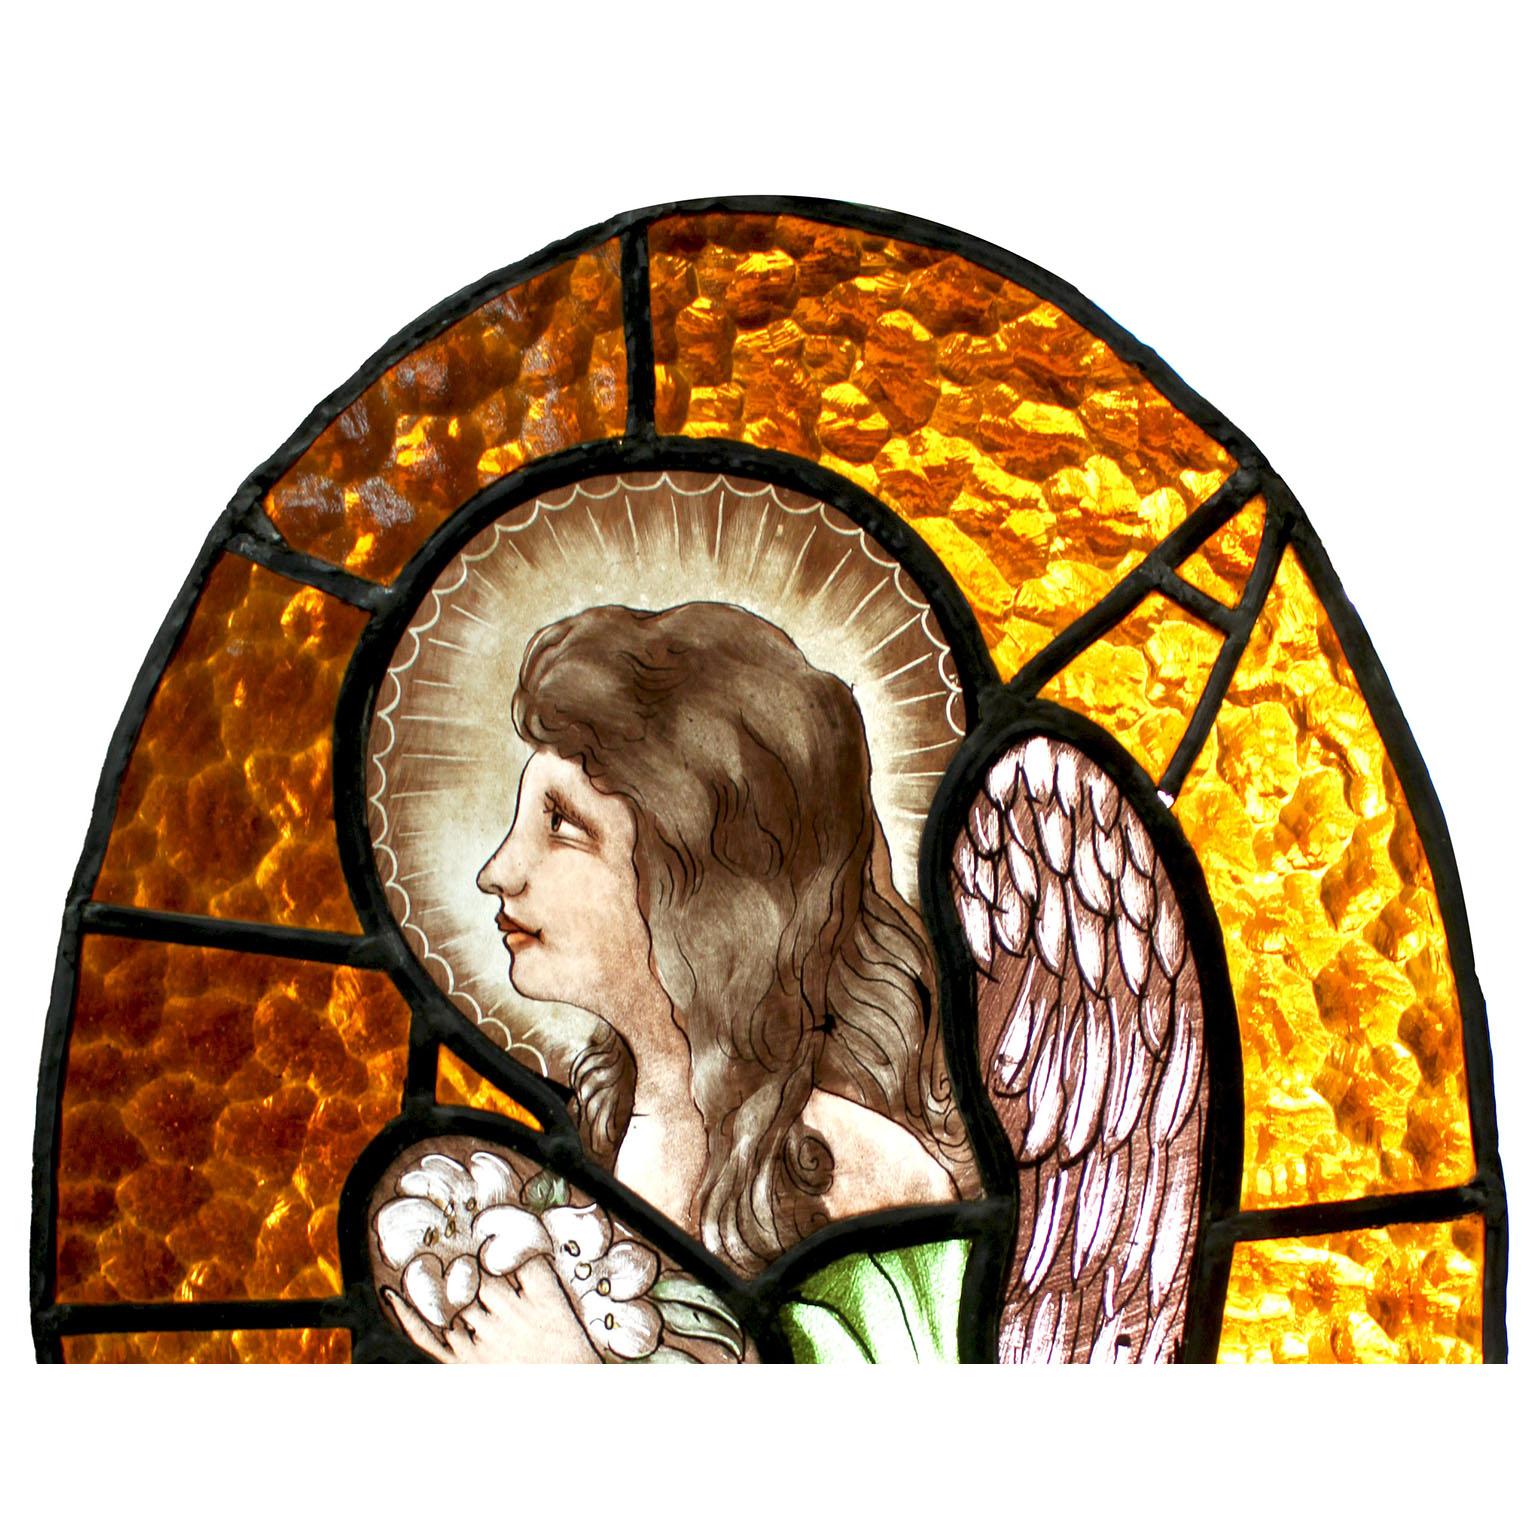 A French early 20th Century Neoclassical Revival stained glass panel depicting a praying angel or cupid. The charming oval shaped hand-painted multi-colored glass panel or window depicting a side view of a praying angel or cupid, a holy halo over